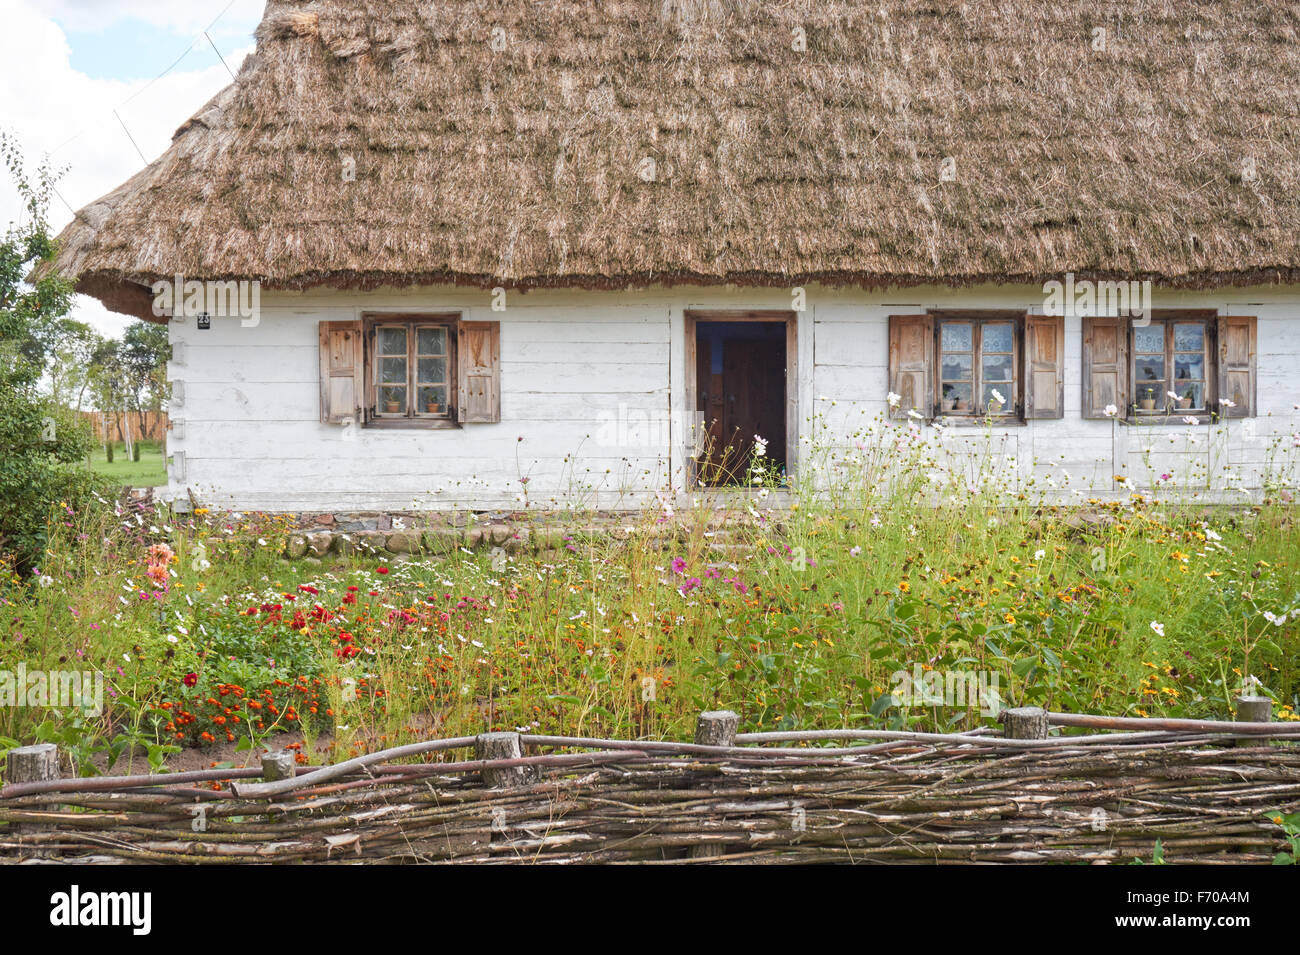 The Museum of the Mazovian Countryside in Sierpc, Poland. 19th century wooden thatched farmhouse. Stock Photo